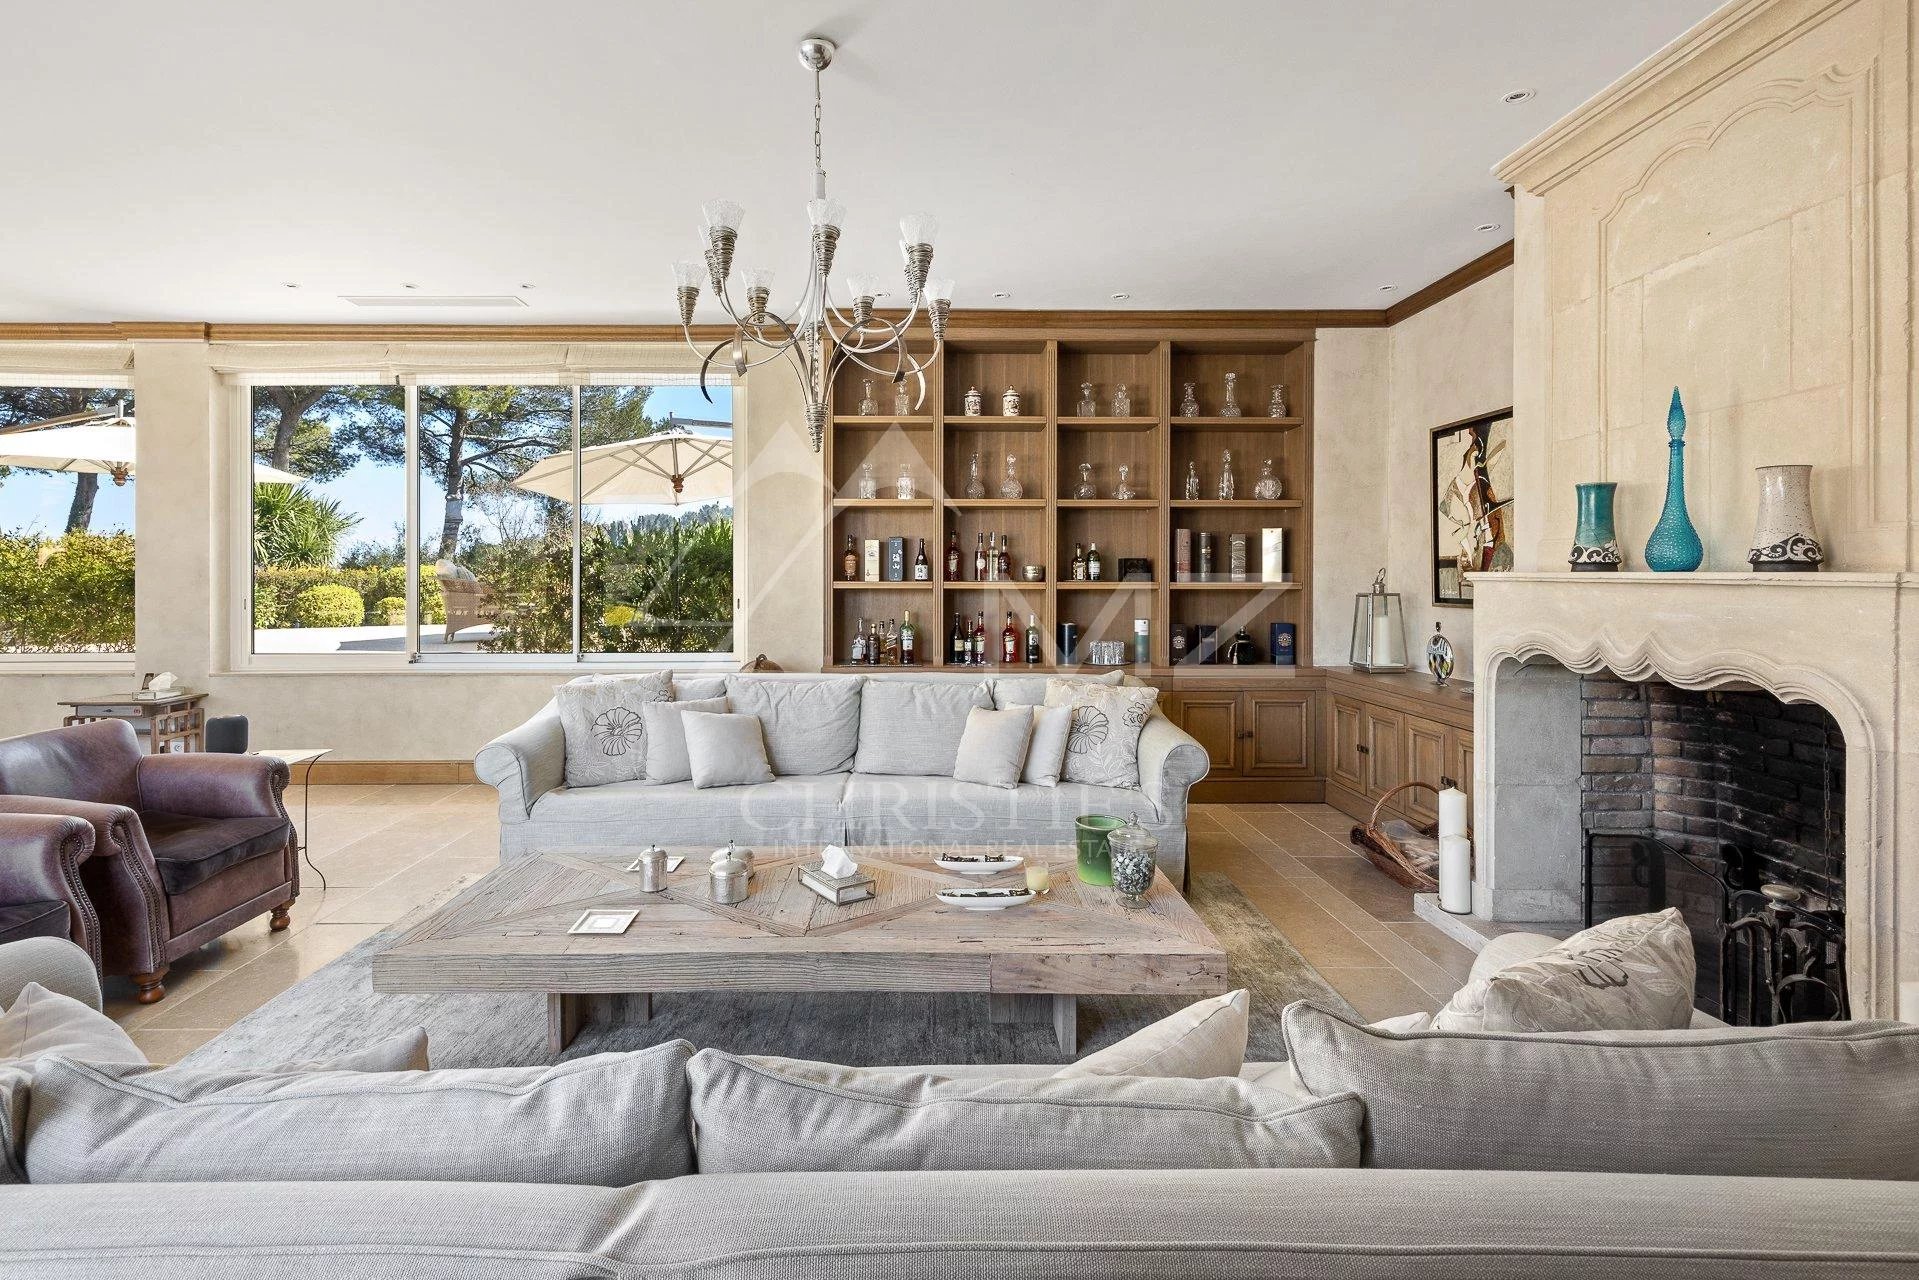 MOUGINS - MAGNIFICENT PROPERTY IN A CLOSED DOMAIN